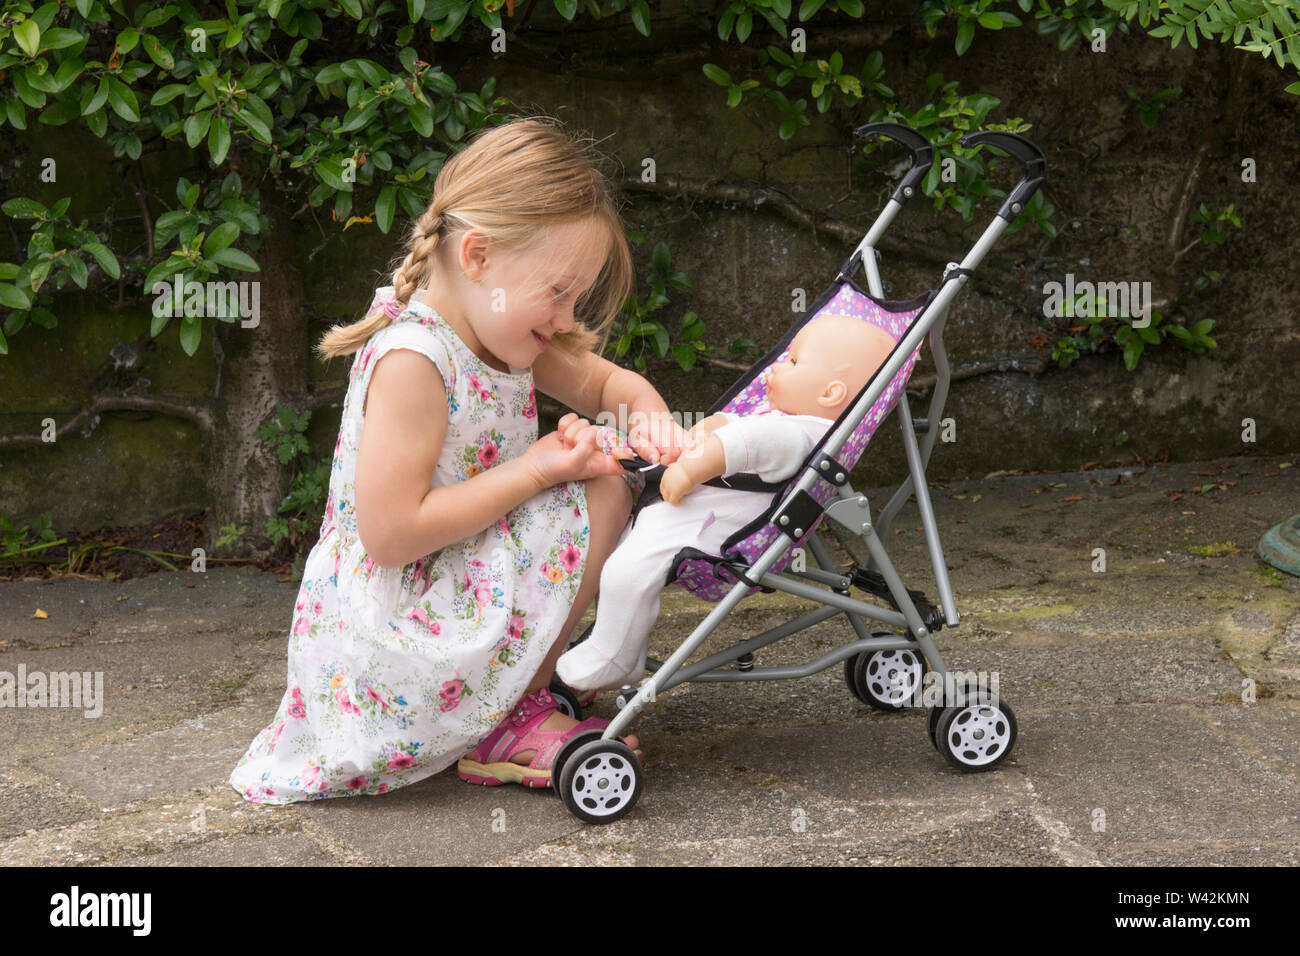 three year old child, young girl in pretty dress, fair hair in pig tails playing with doll in toy pushchair, outside in garden, UK Stock Photo